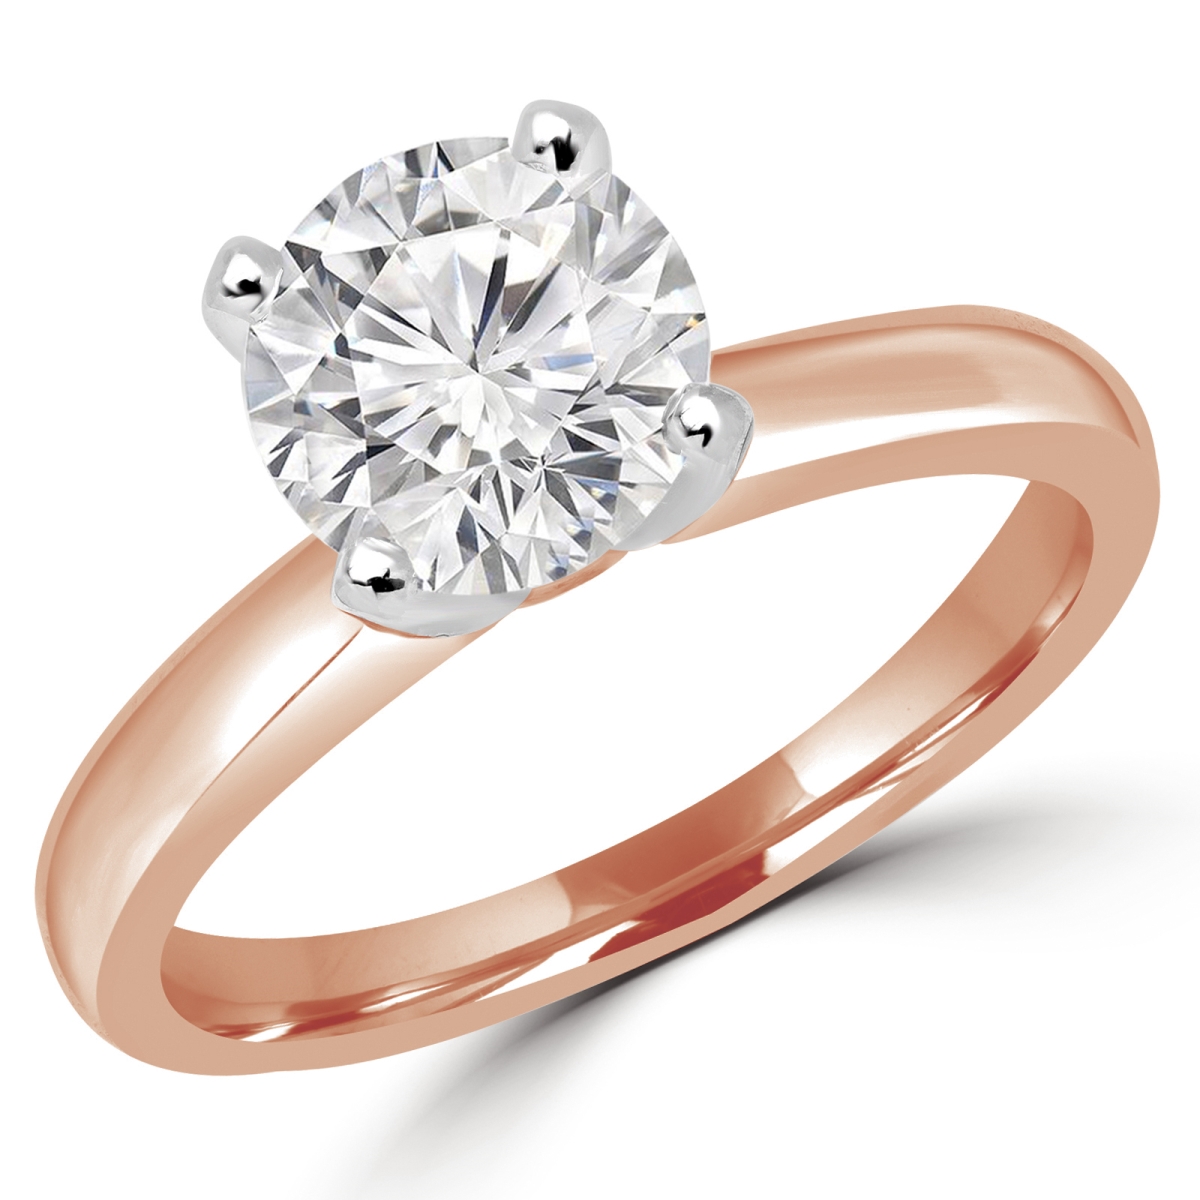 Picture of Majesty Diamonds MD180009-4.25 0.6 CT Round Diamond Solitaire Engagement Ring in 14K Rose Gold - Size 4.25